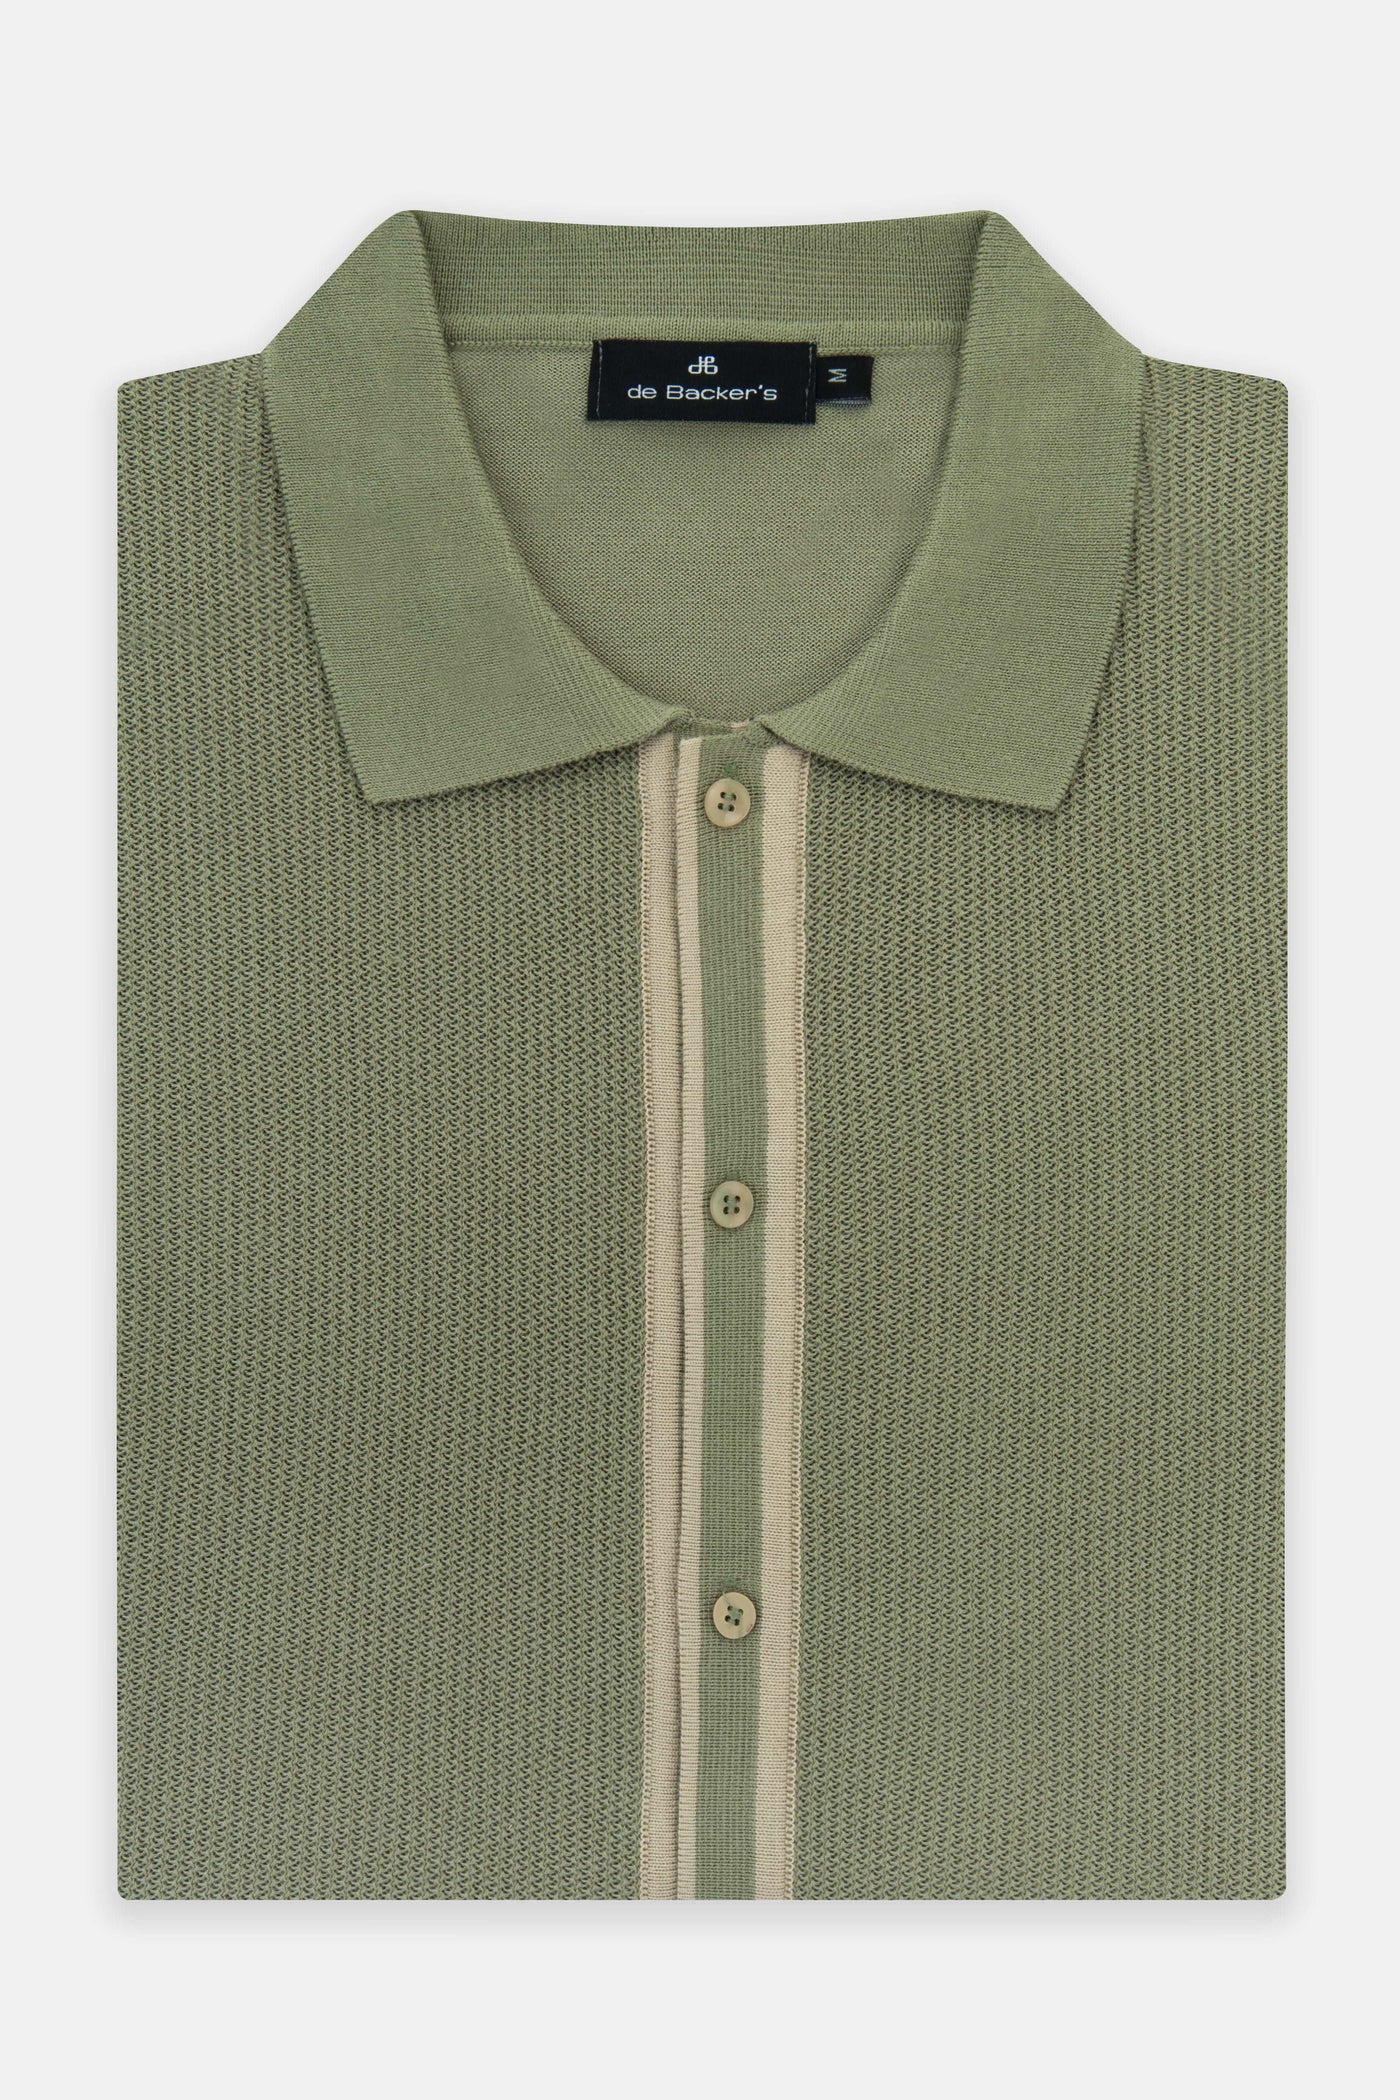 Jacquard Knitted Moss Green polo